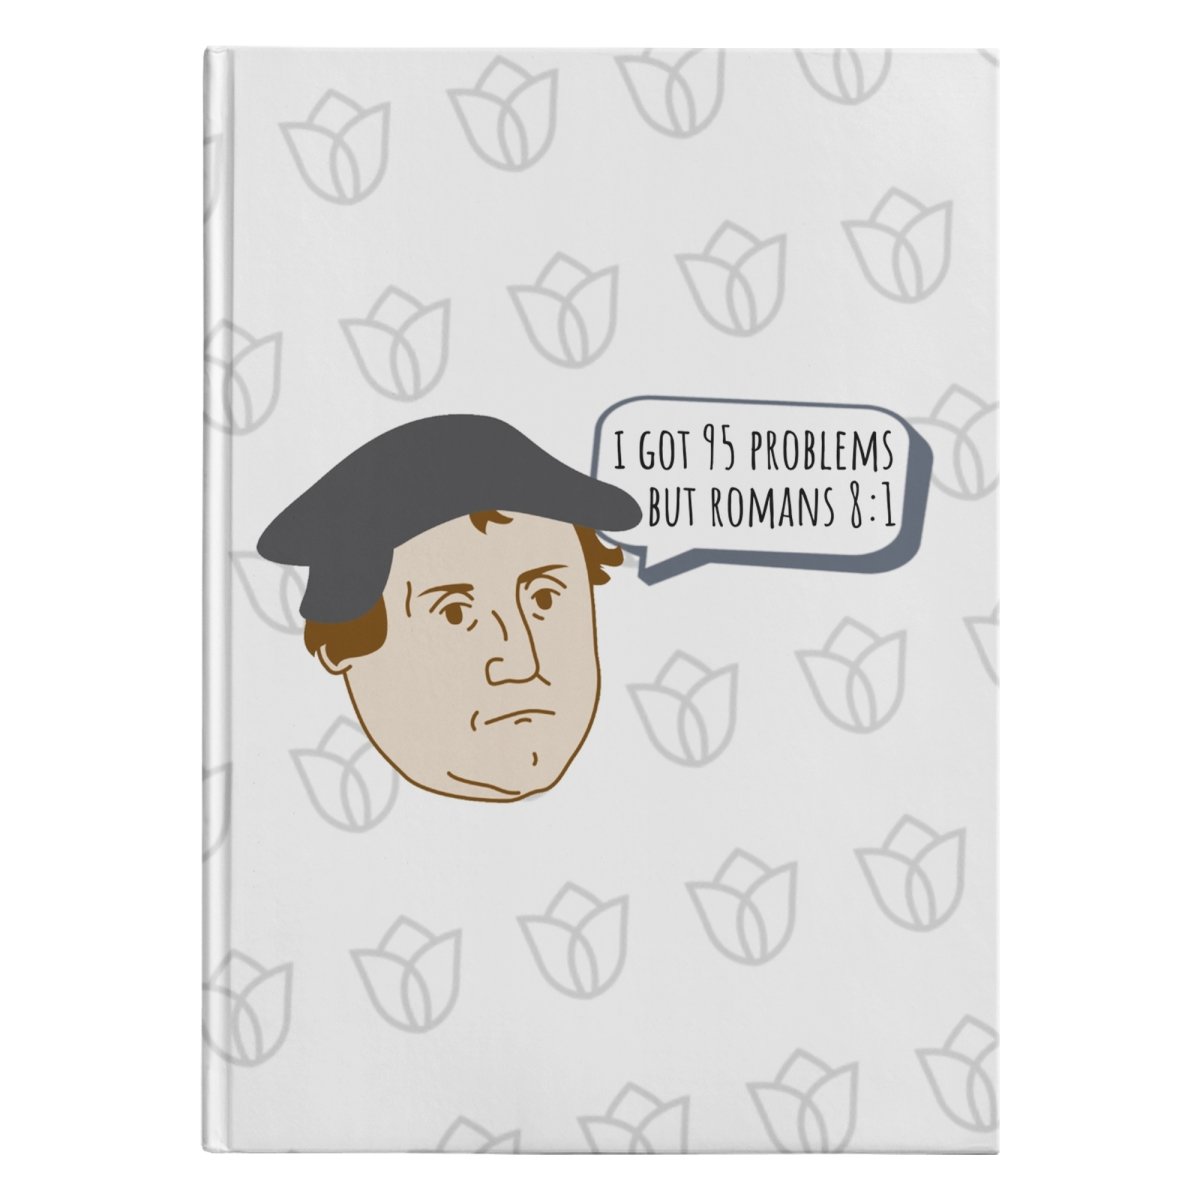 I Got 95 Problems (150 Page Hardcover Journal) - SDG Clothing